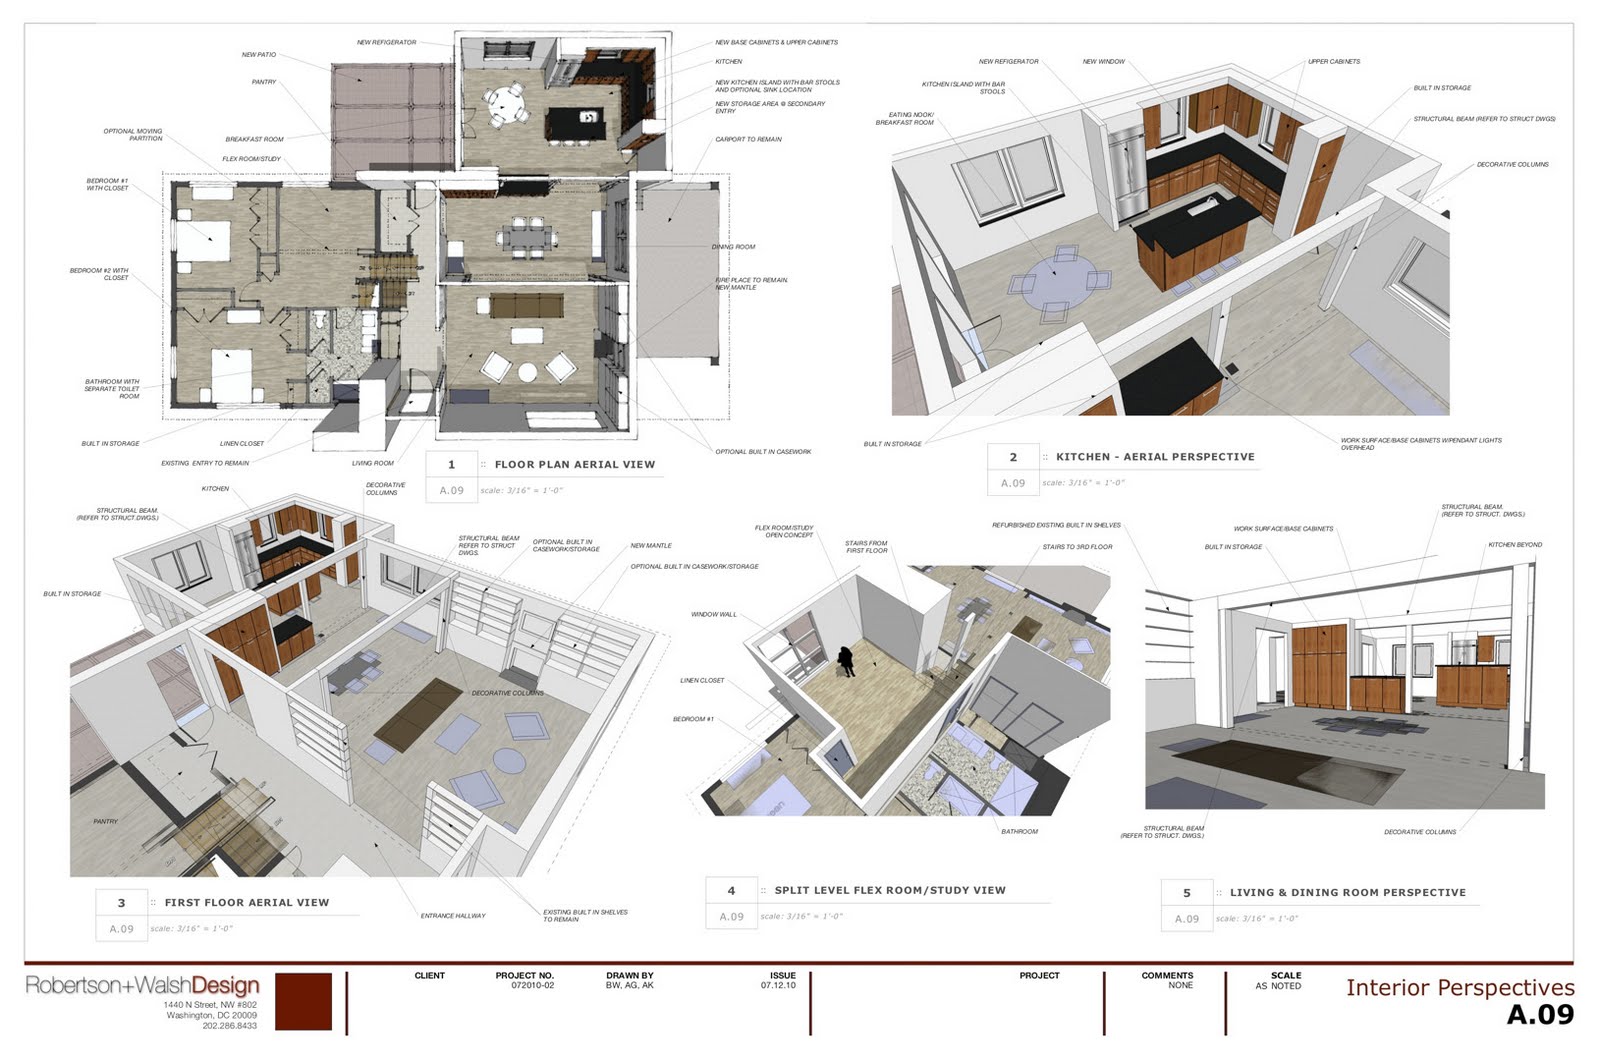 Sketchup Design Case Study by Robertson+WalshDesign